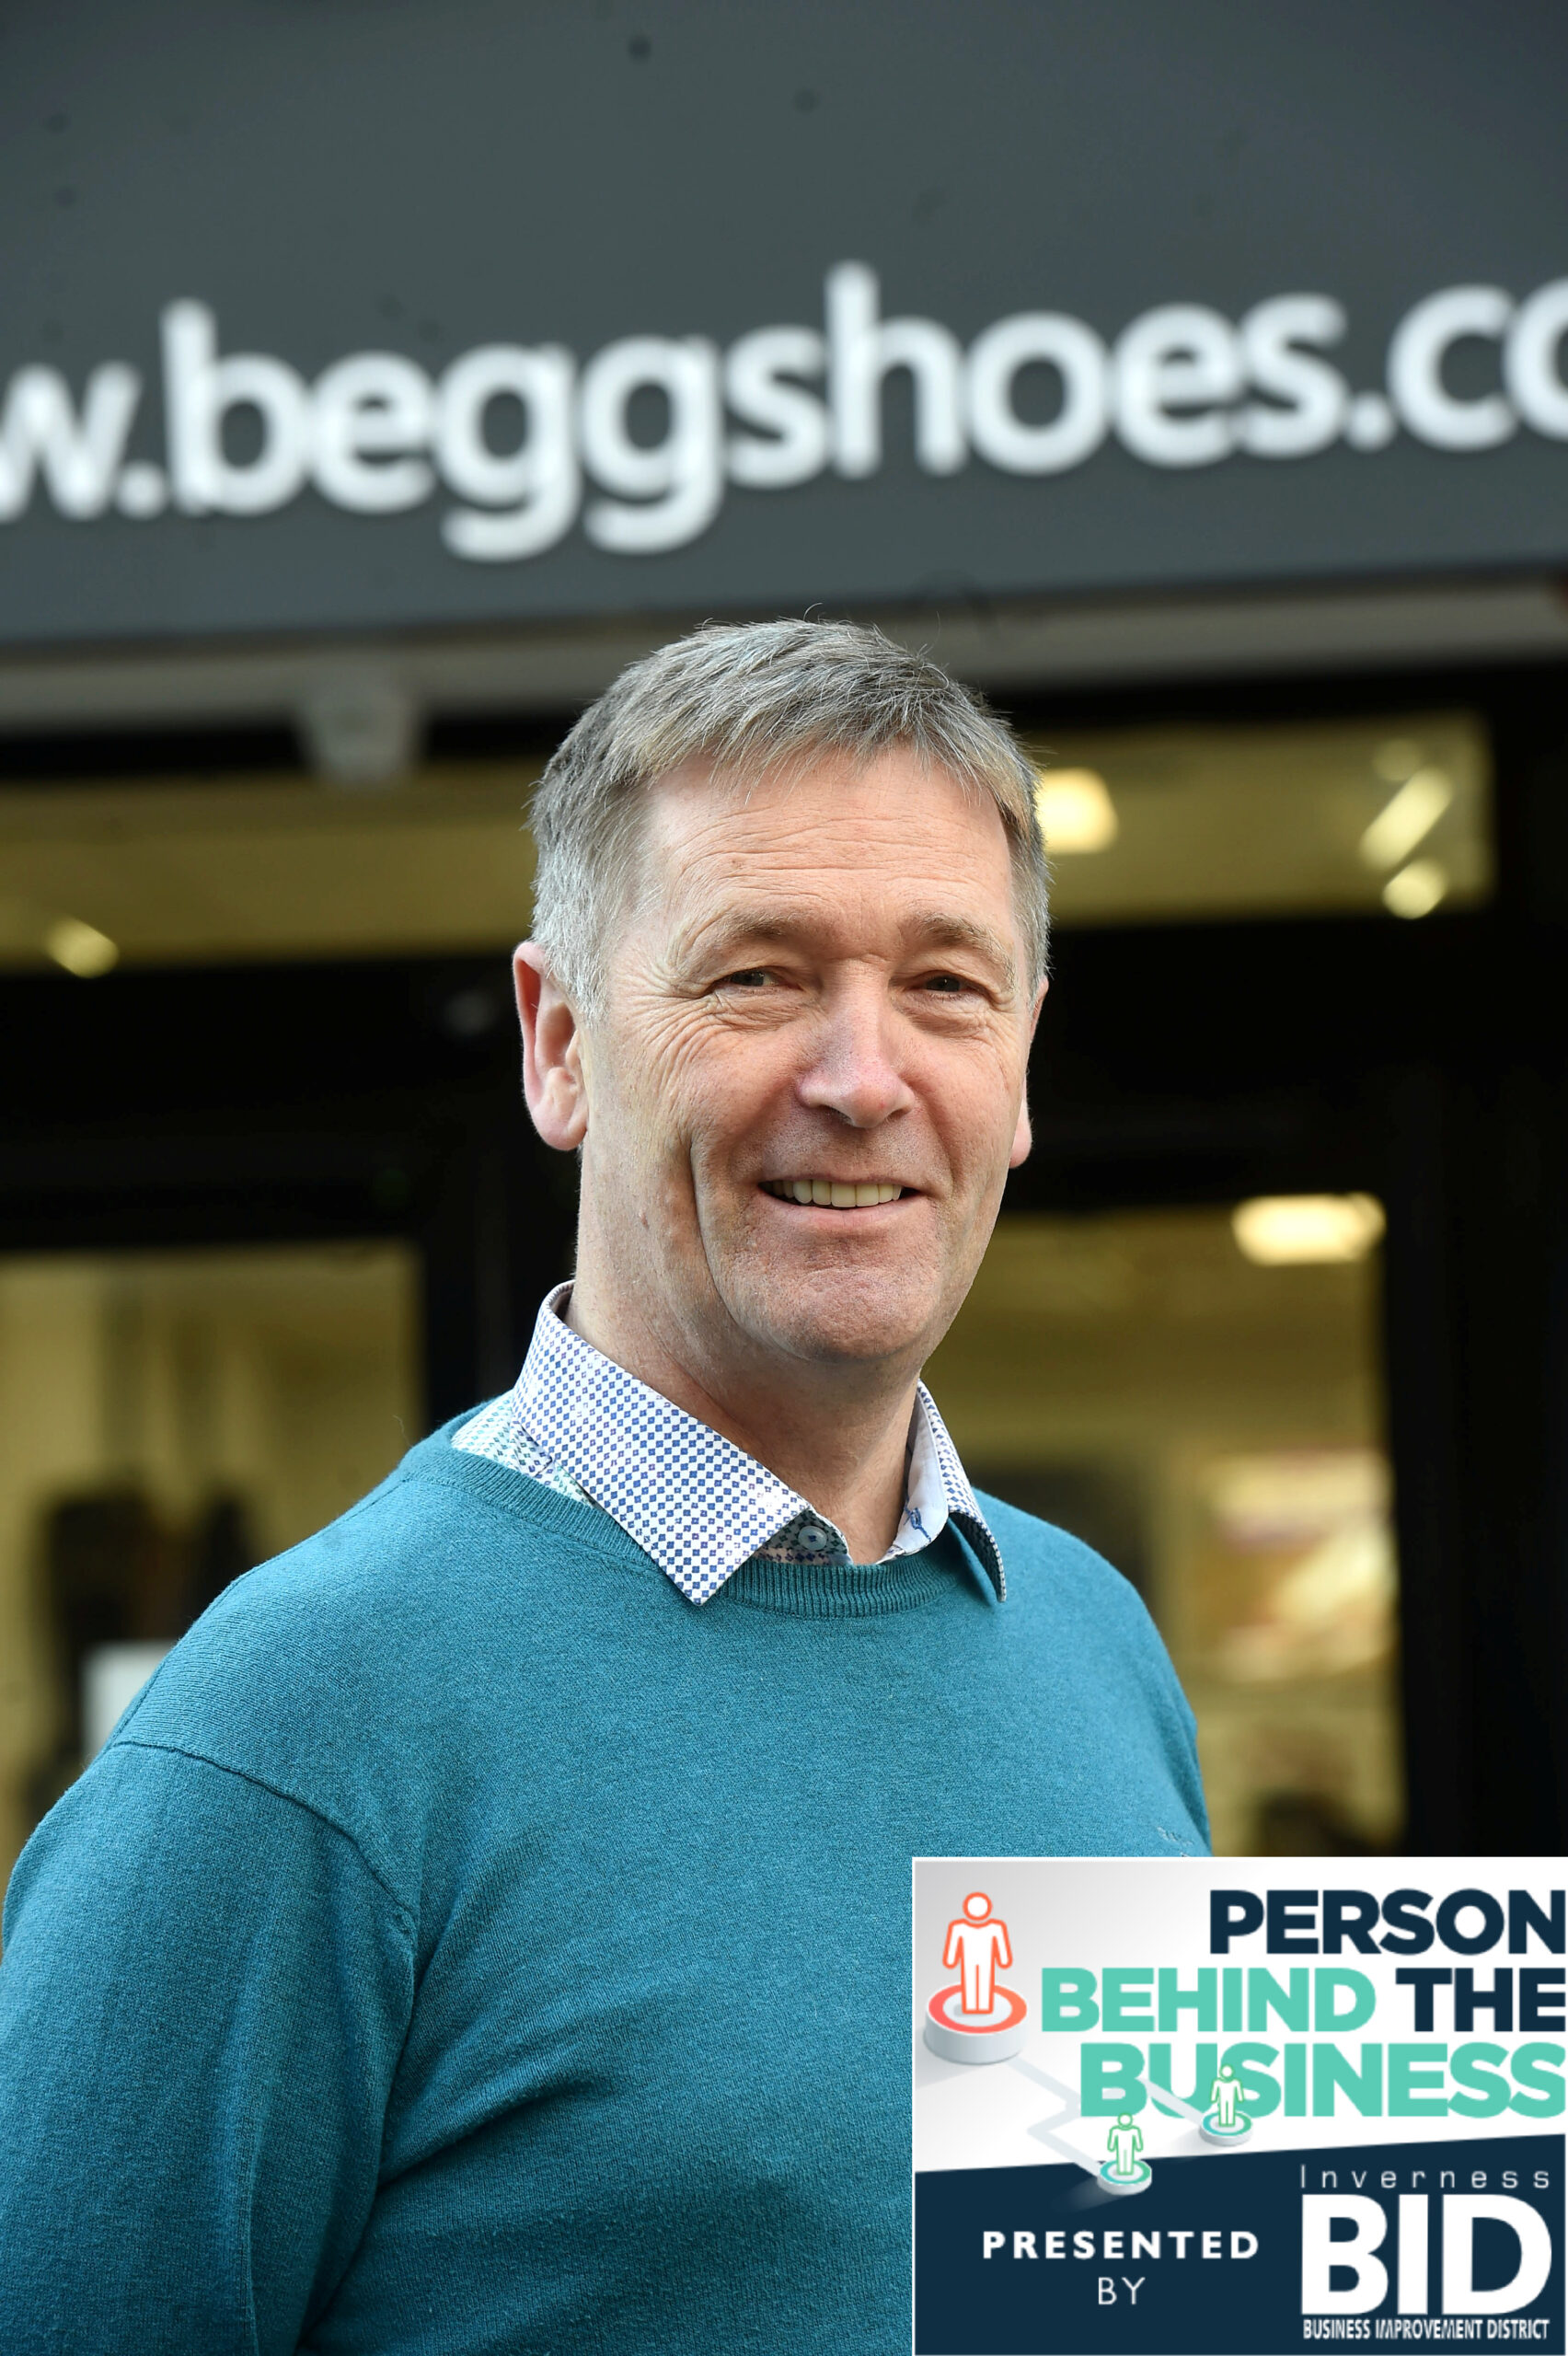 Person Behind the Business Featuring Garek Begg of Begg Shoes & Bags